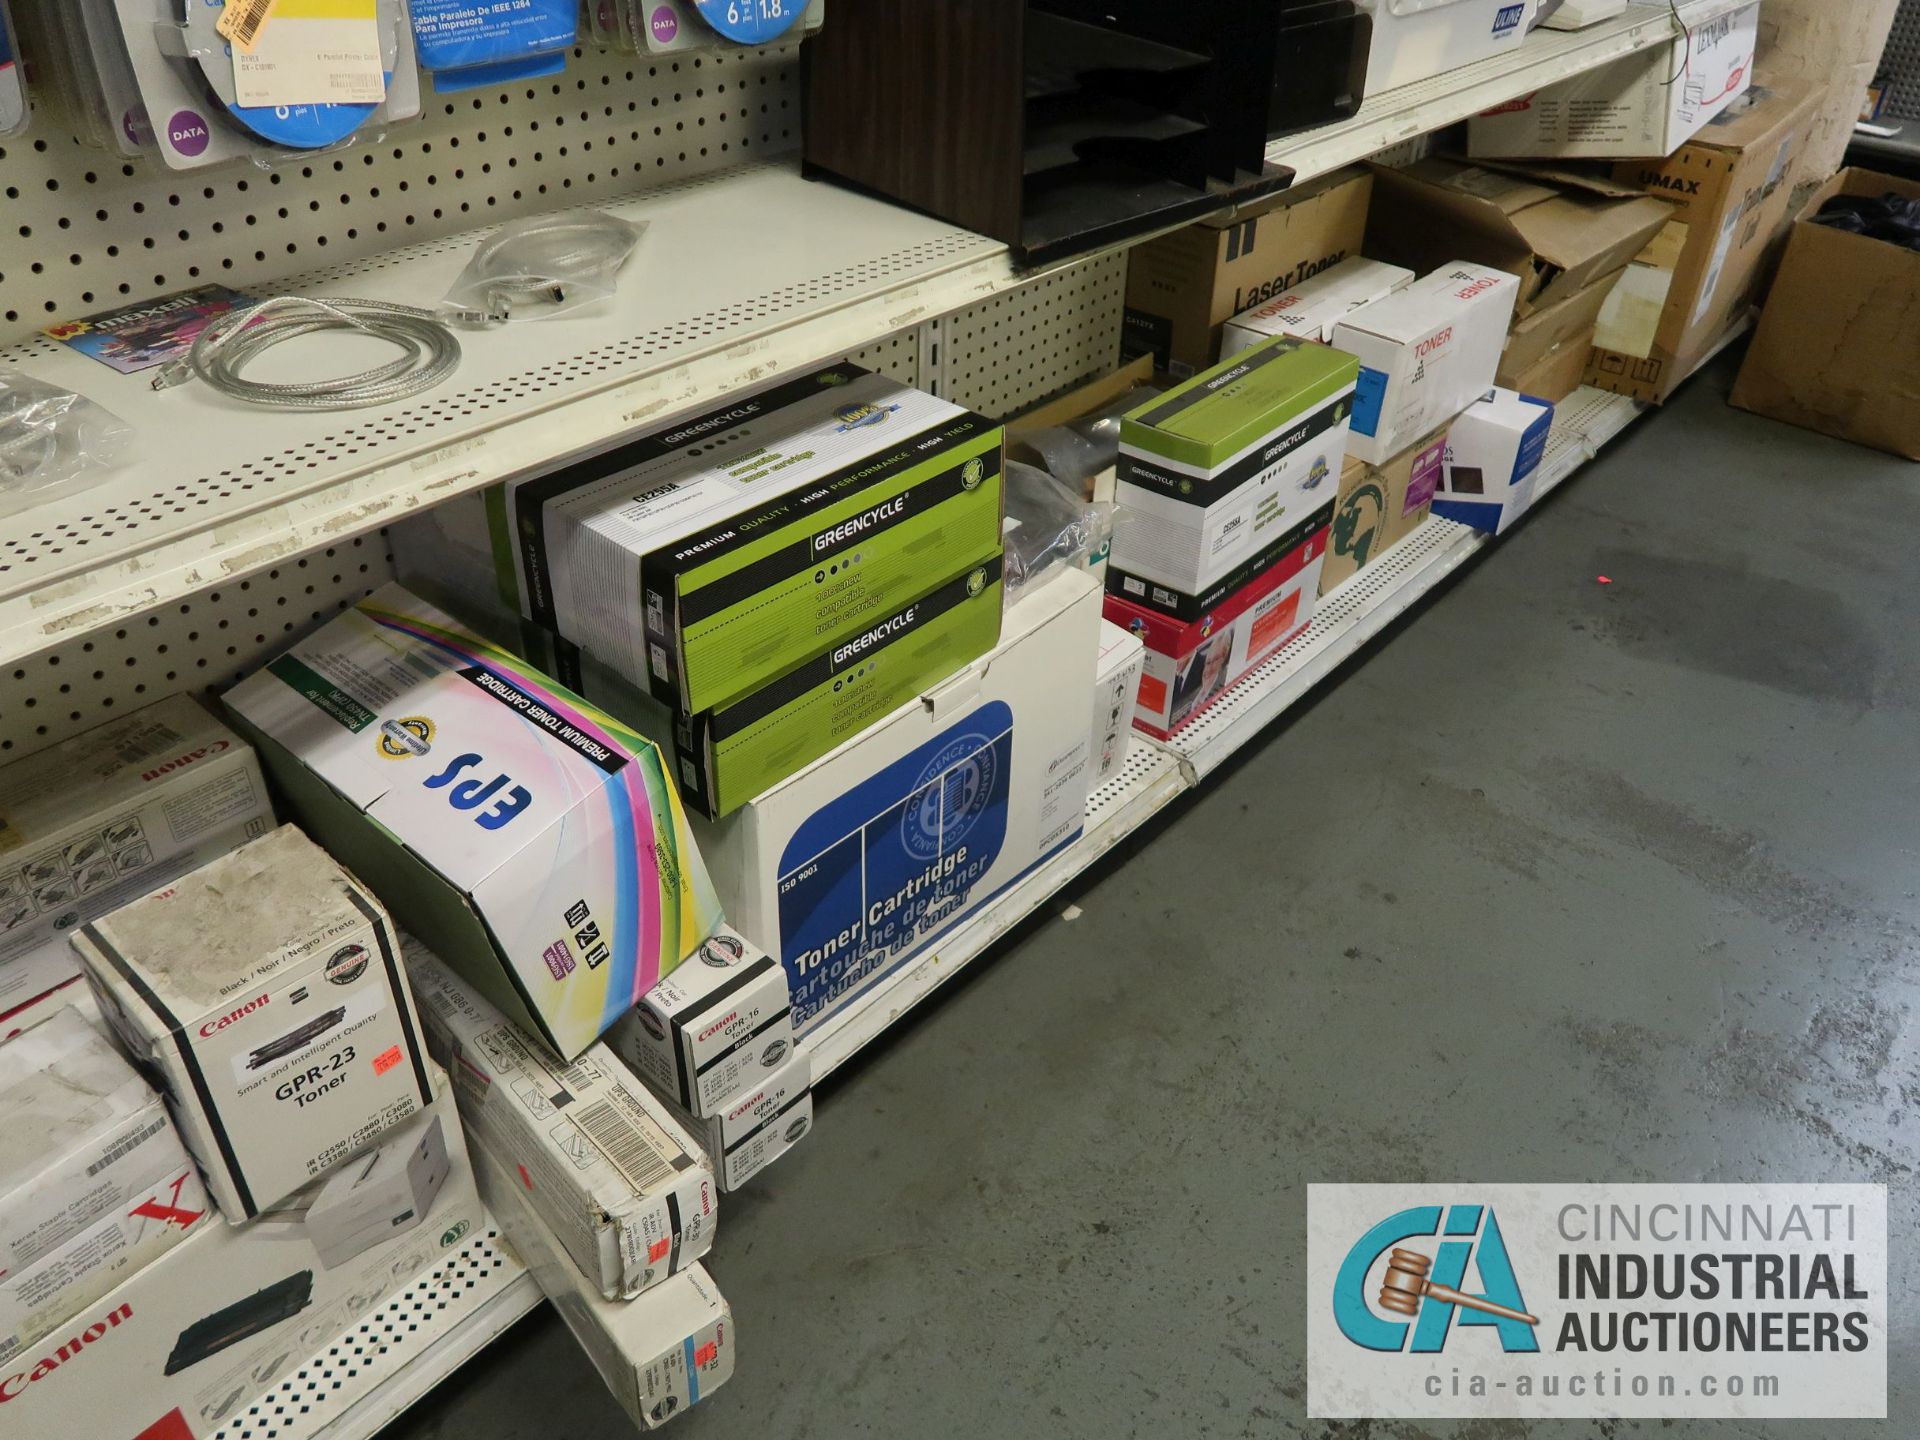 (LOT) CONTENTS OF DISPLAY RACKS INCLUDING TONERS, CELL PHONE HOLDERS AND CASES, PRINTER CABLES, - Image 7 of 7